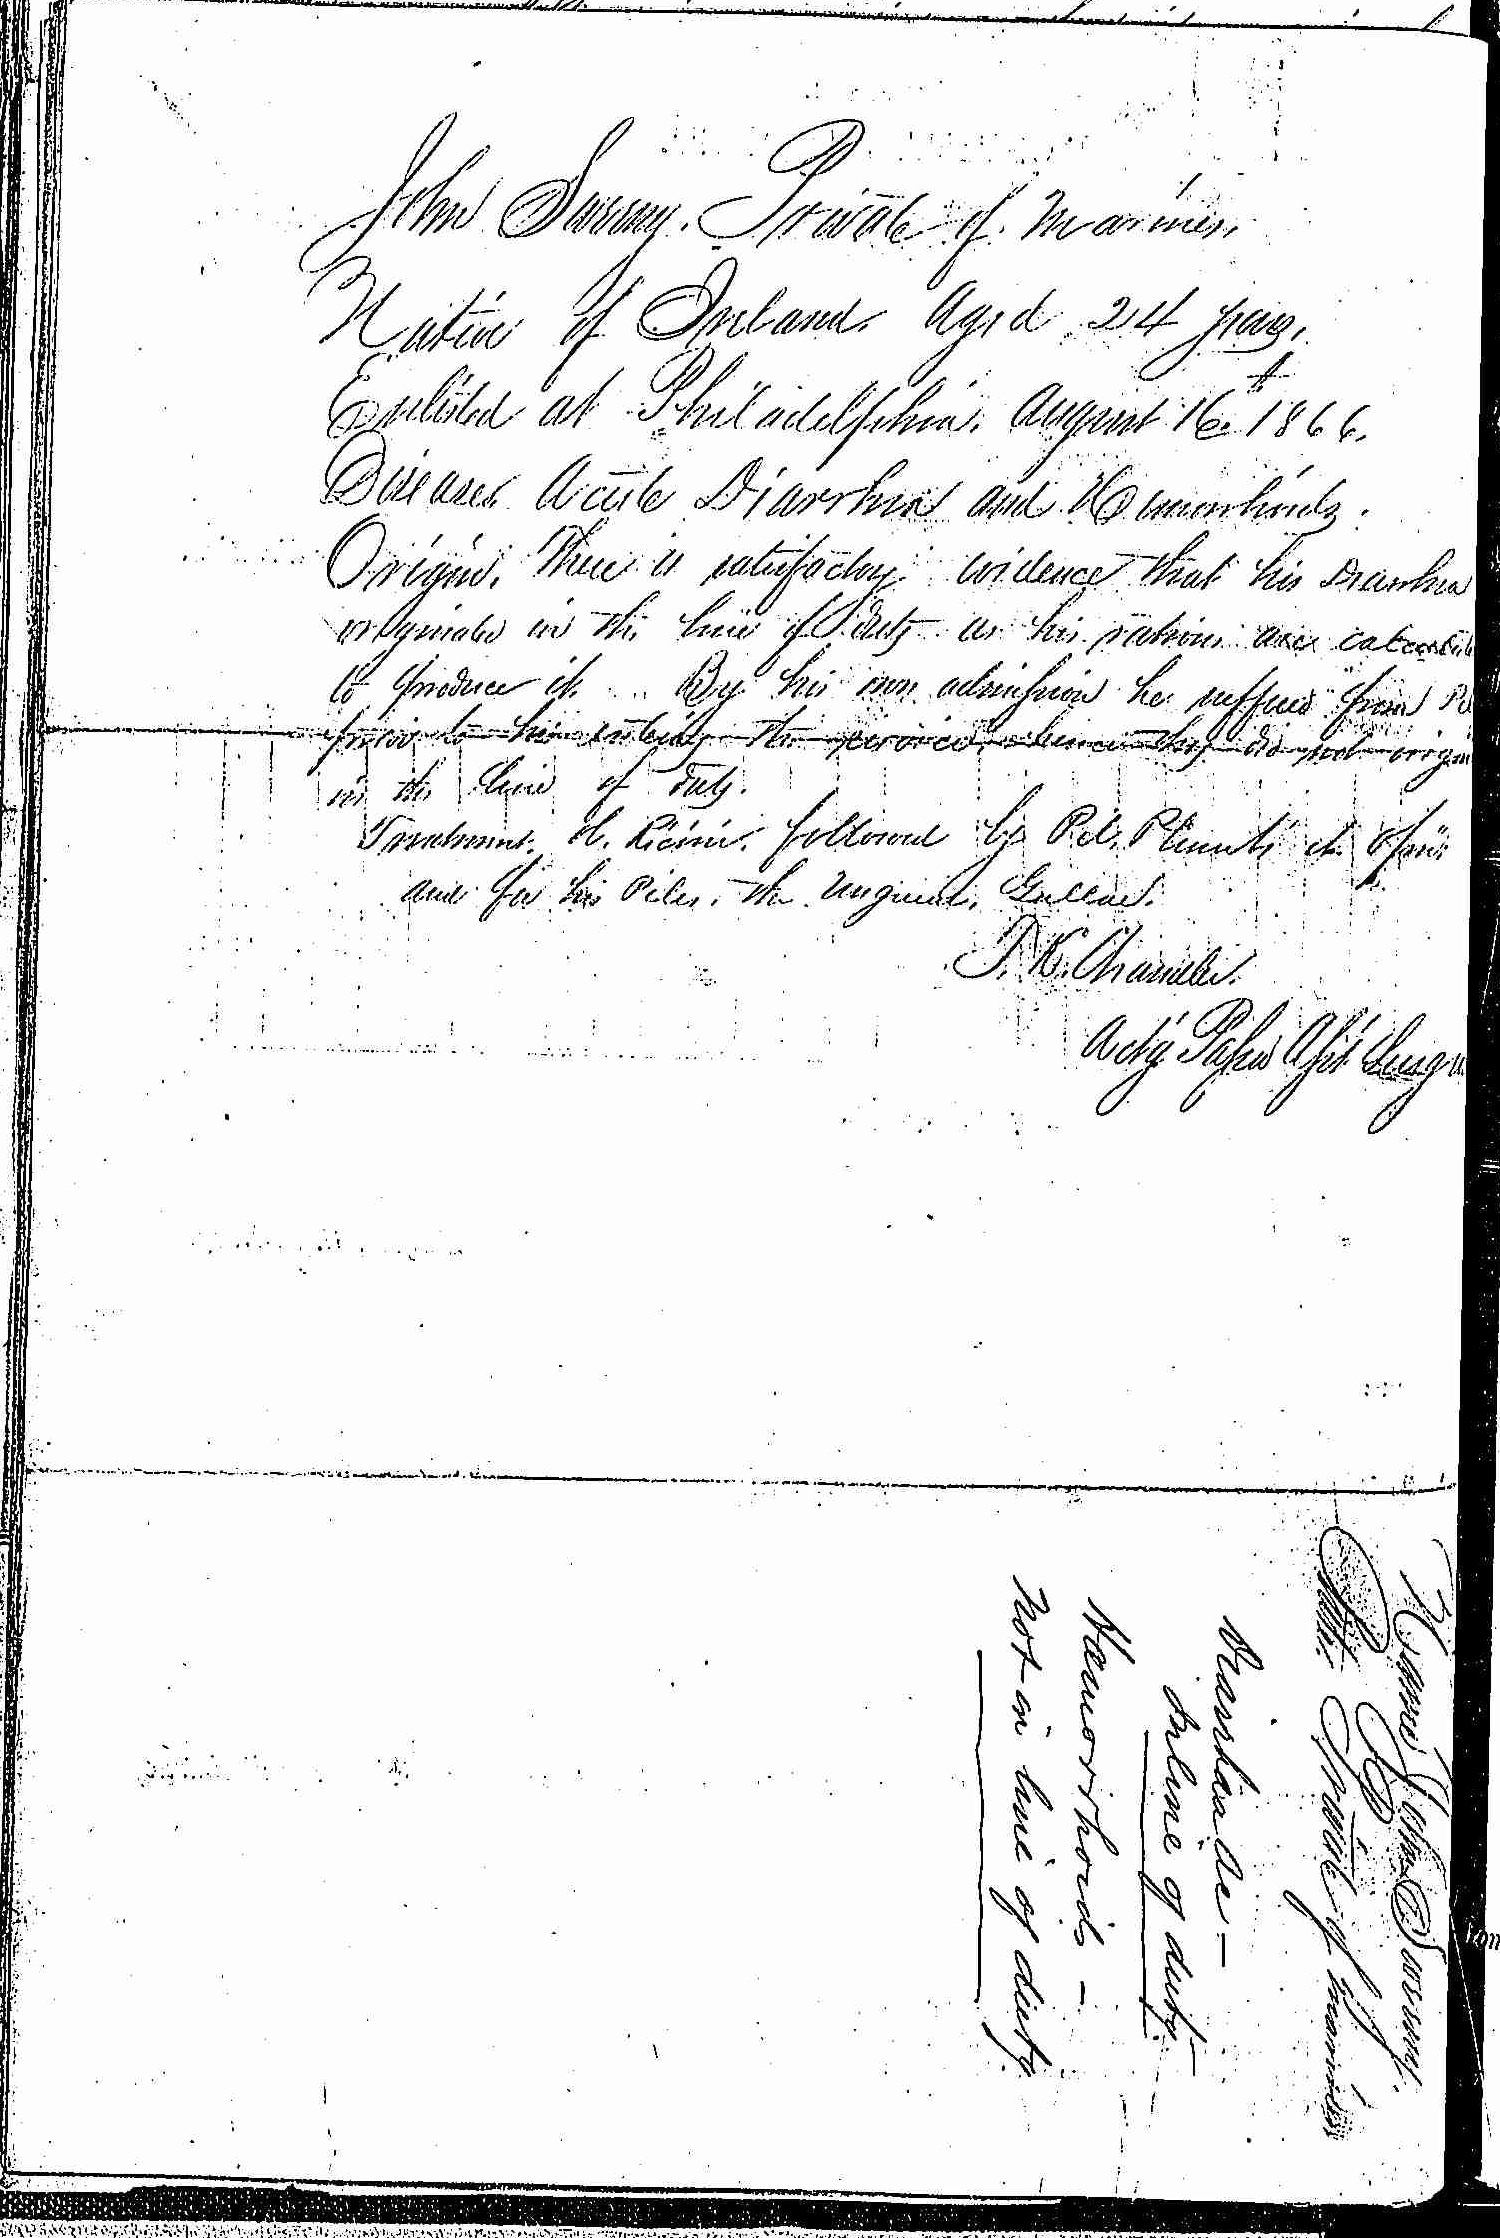 Entry for John Sweeny (page 2 of 2) in the log Hospital Tickets and Case Papers - Naval Hospital - Washington, D.C. - 1865-68